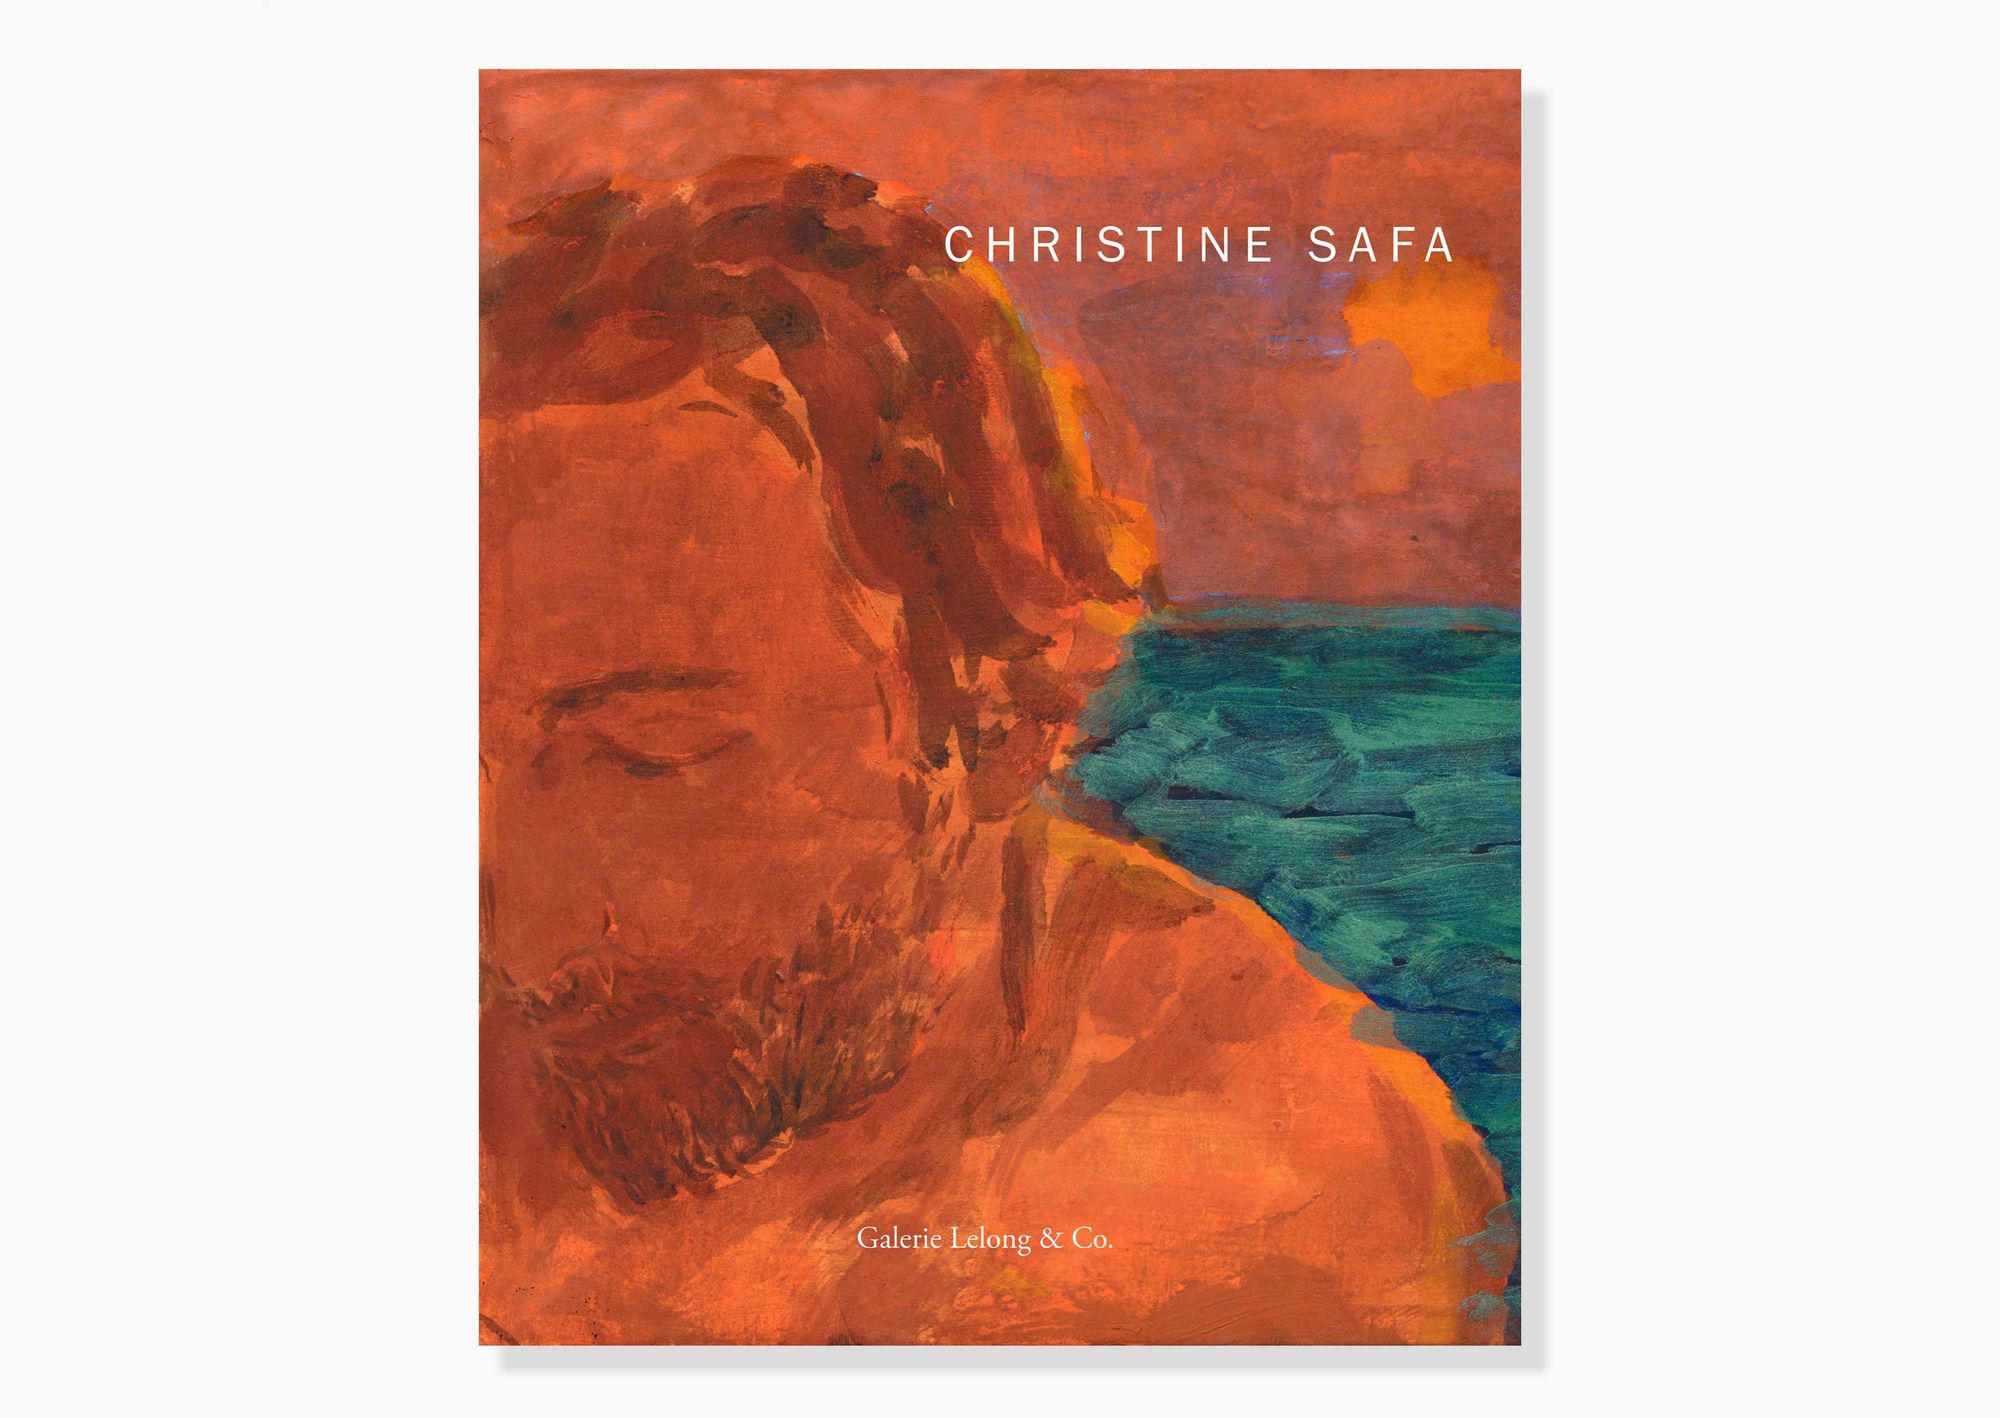 Detail view of Christine Safa against a plain gray background